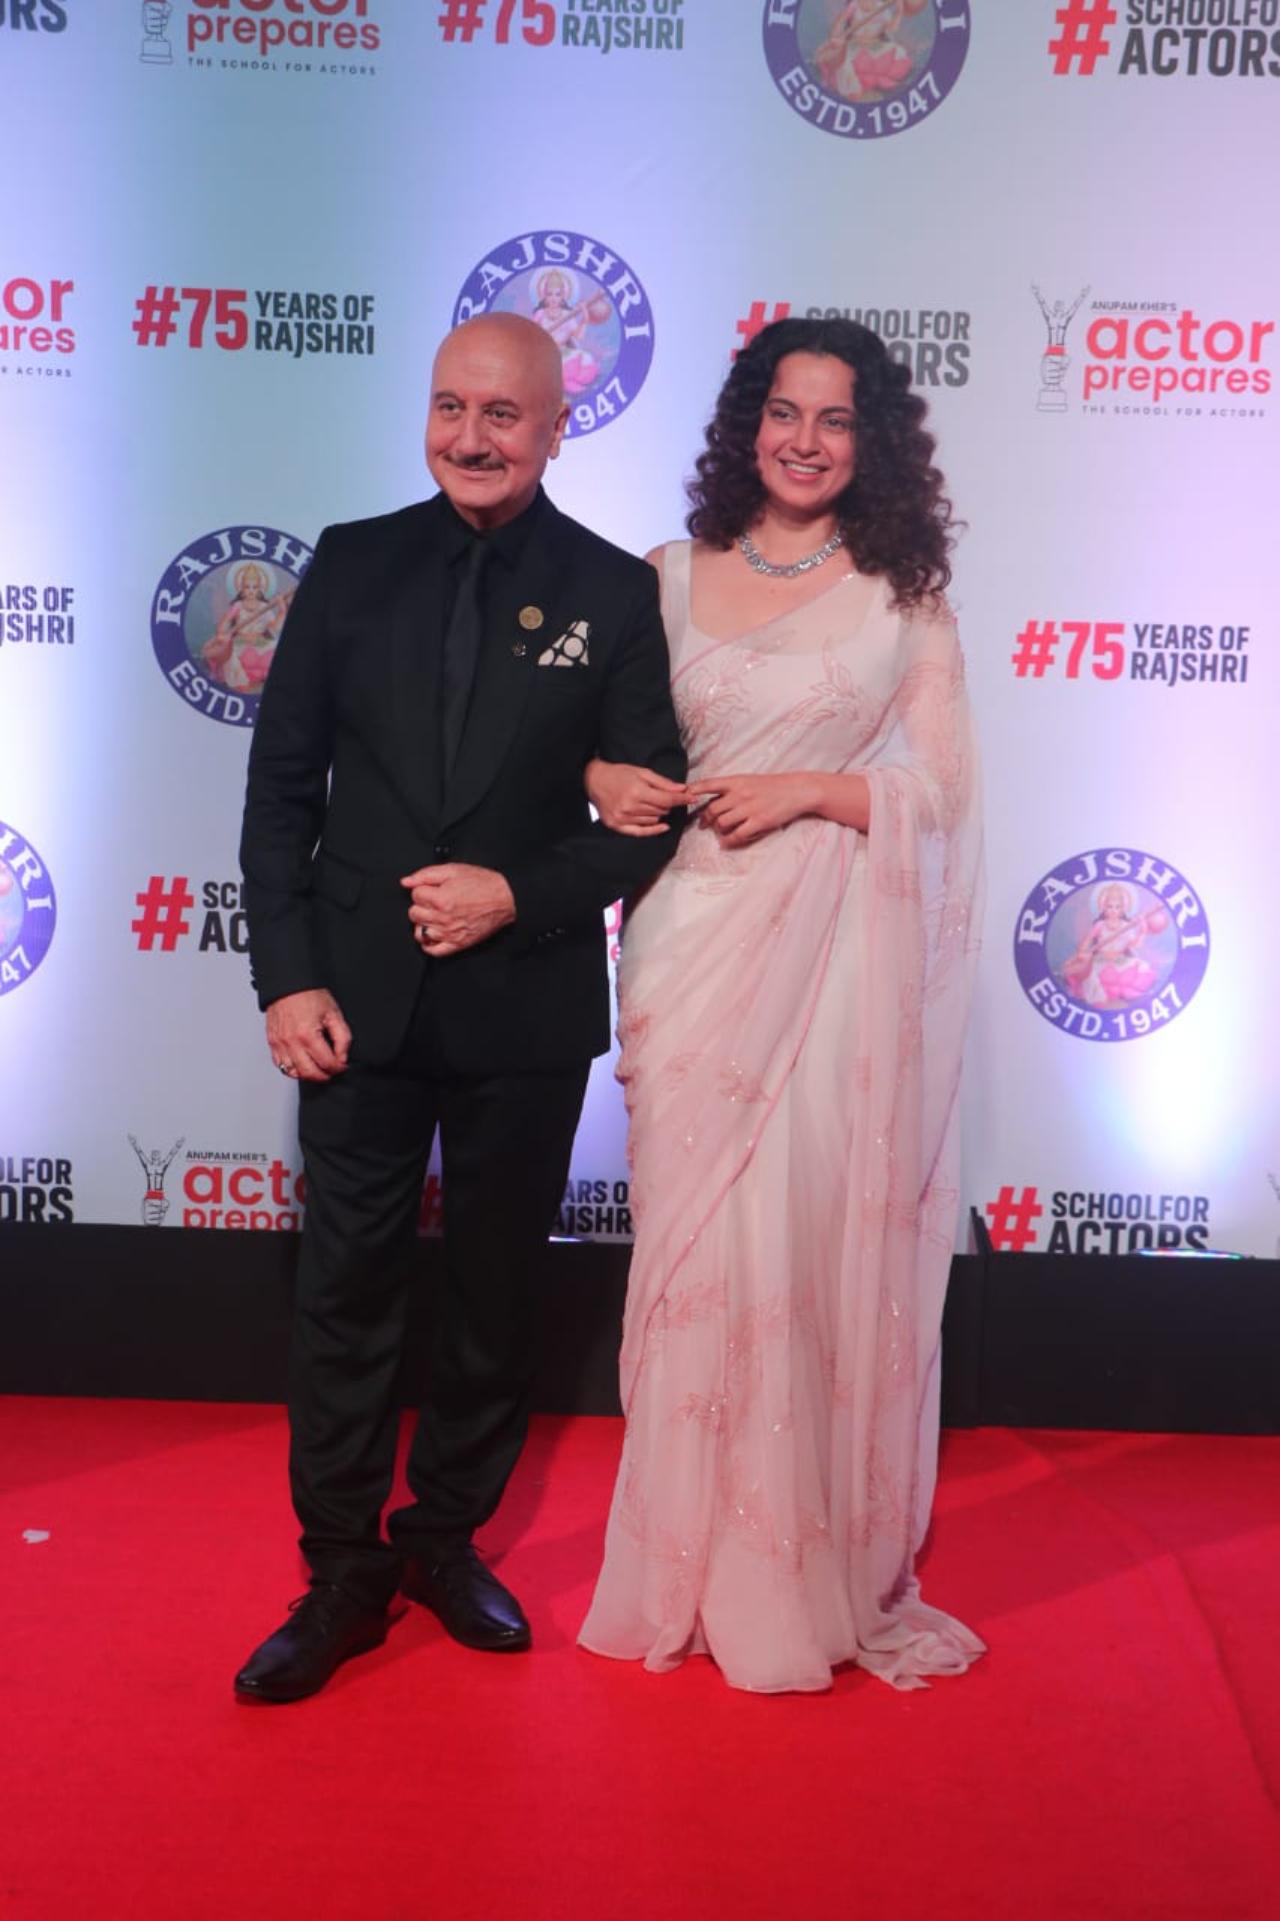 Actress Kangana Ranaut graced the red carpet in a baby pink saree. She posed with her Emergency co-star Anupam Kher for pictures